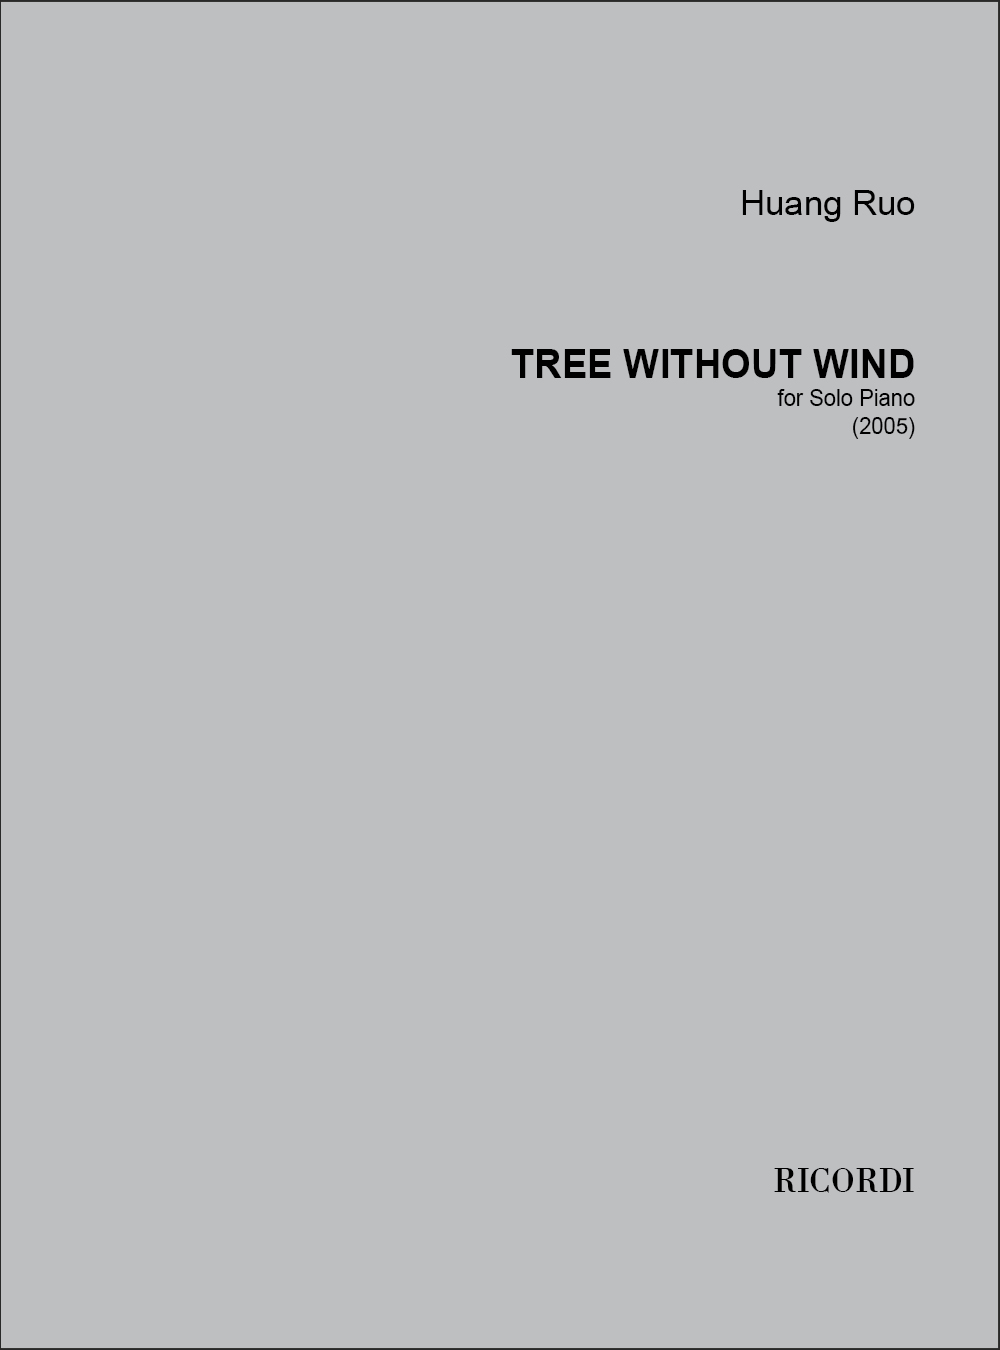 Huang Ruo: Tree without wind: Piano: Instrumental Work